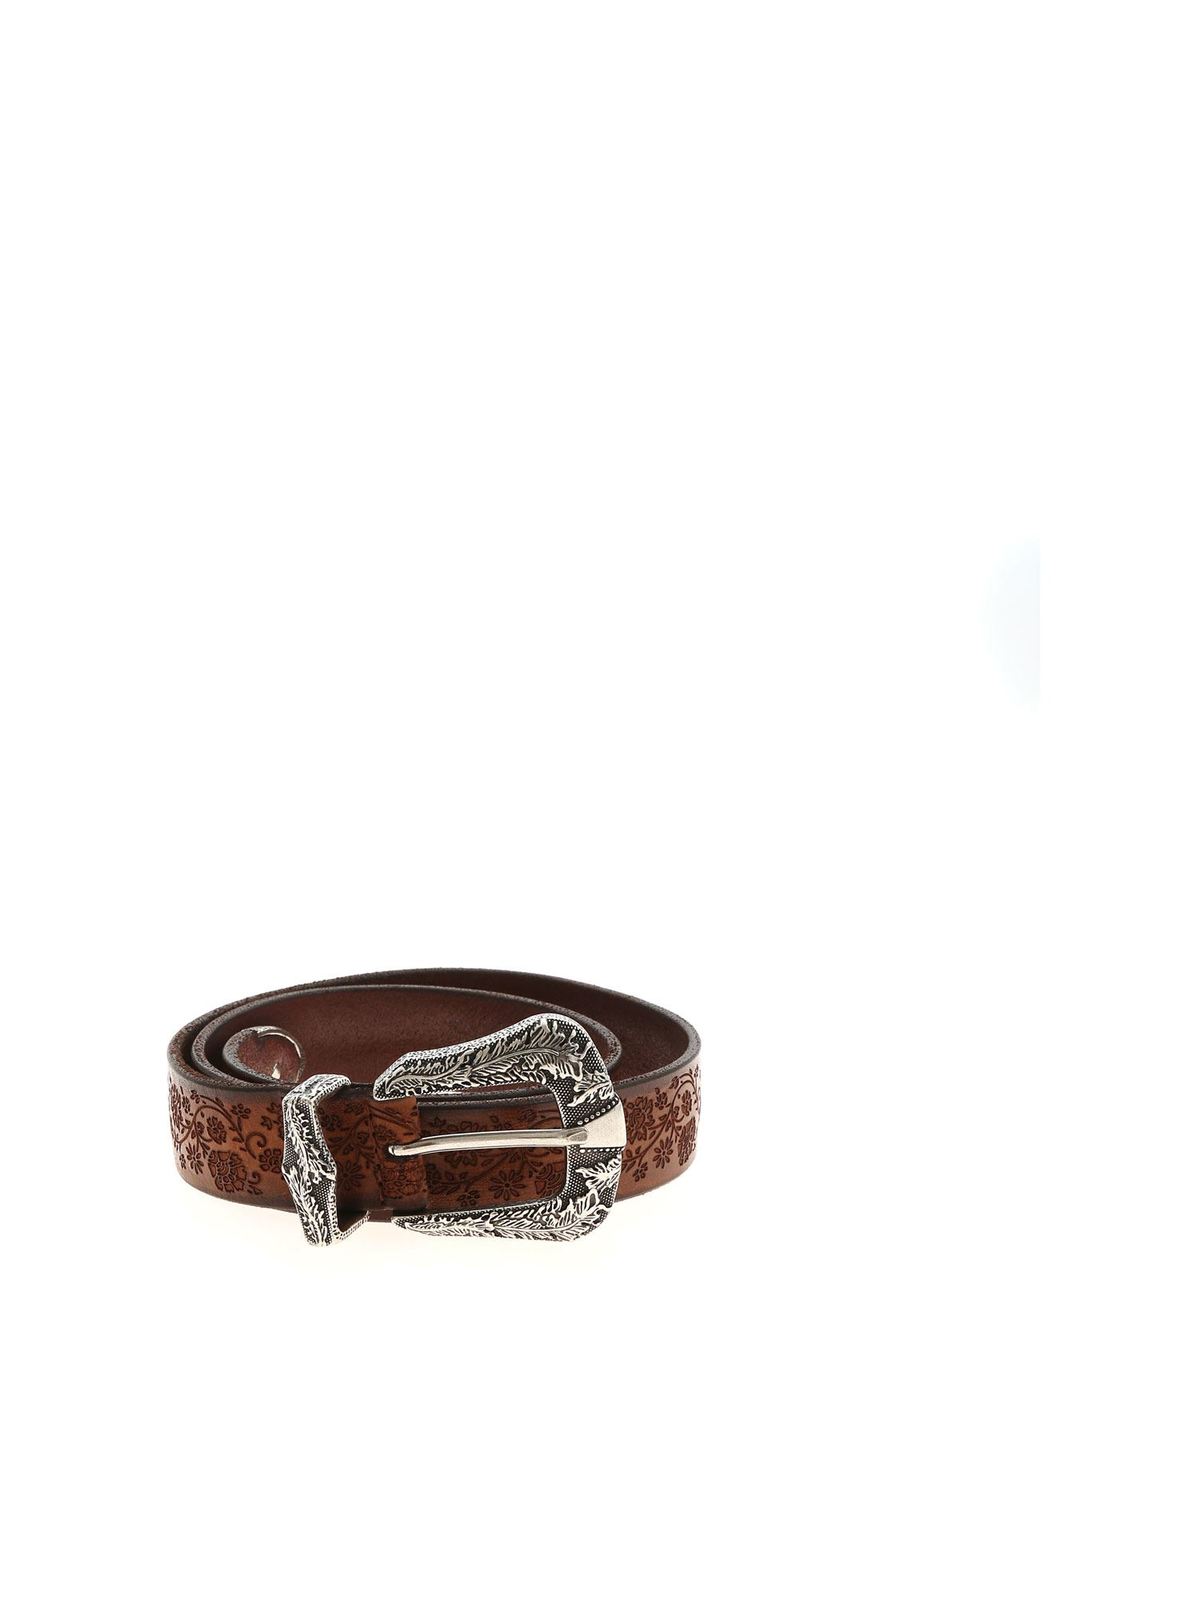 Orciani FLORAL PATTERN LEATHER BELT IN BROWN